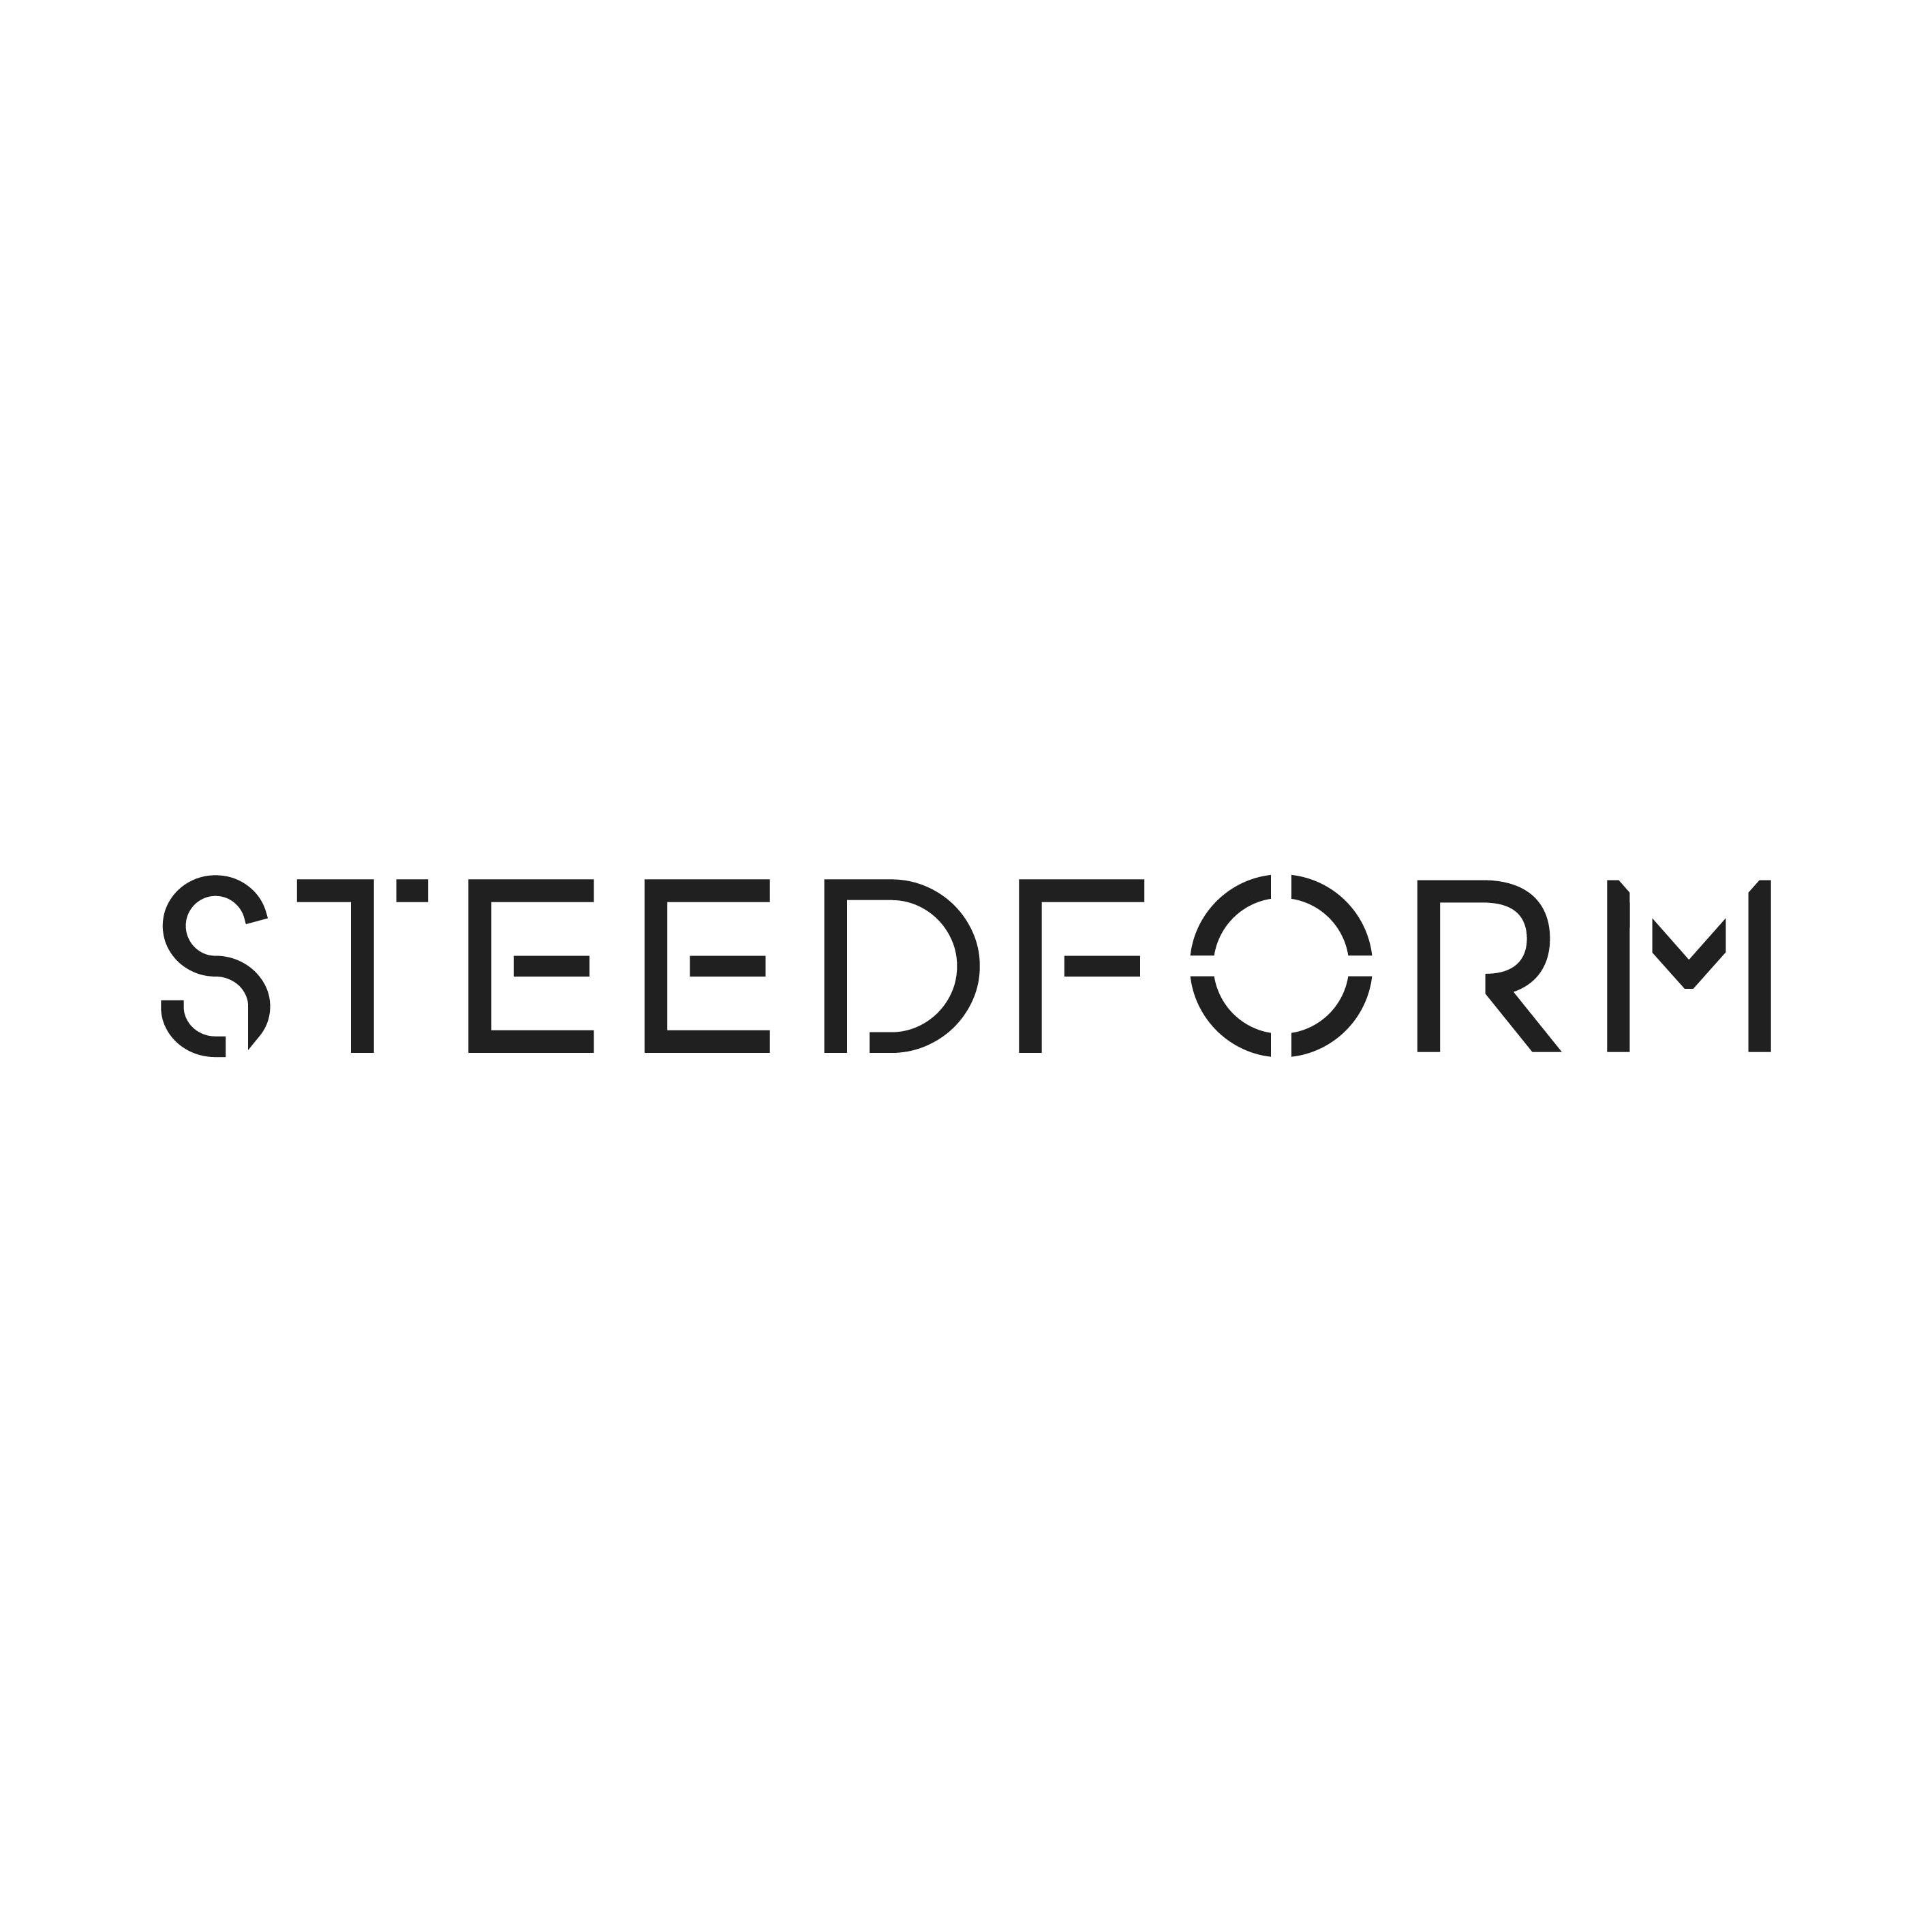 SteedForm - Stone Surfaces & Benchtops Wingfield (08) 8440 7600